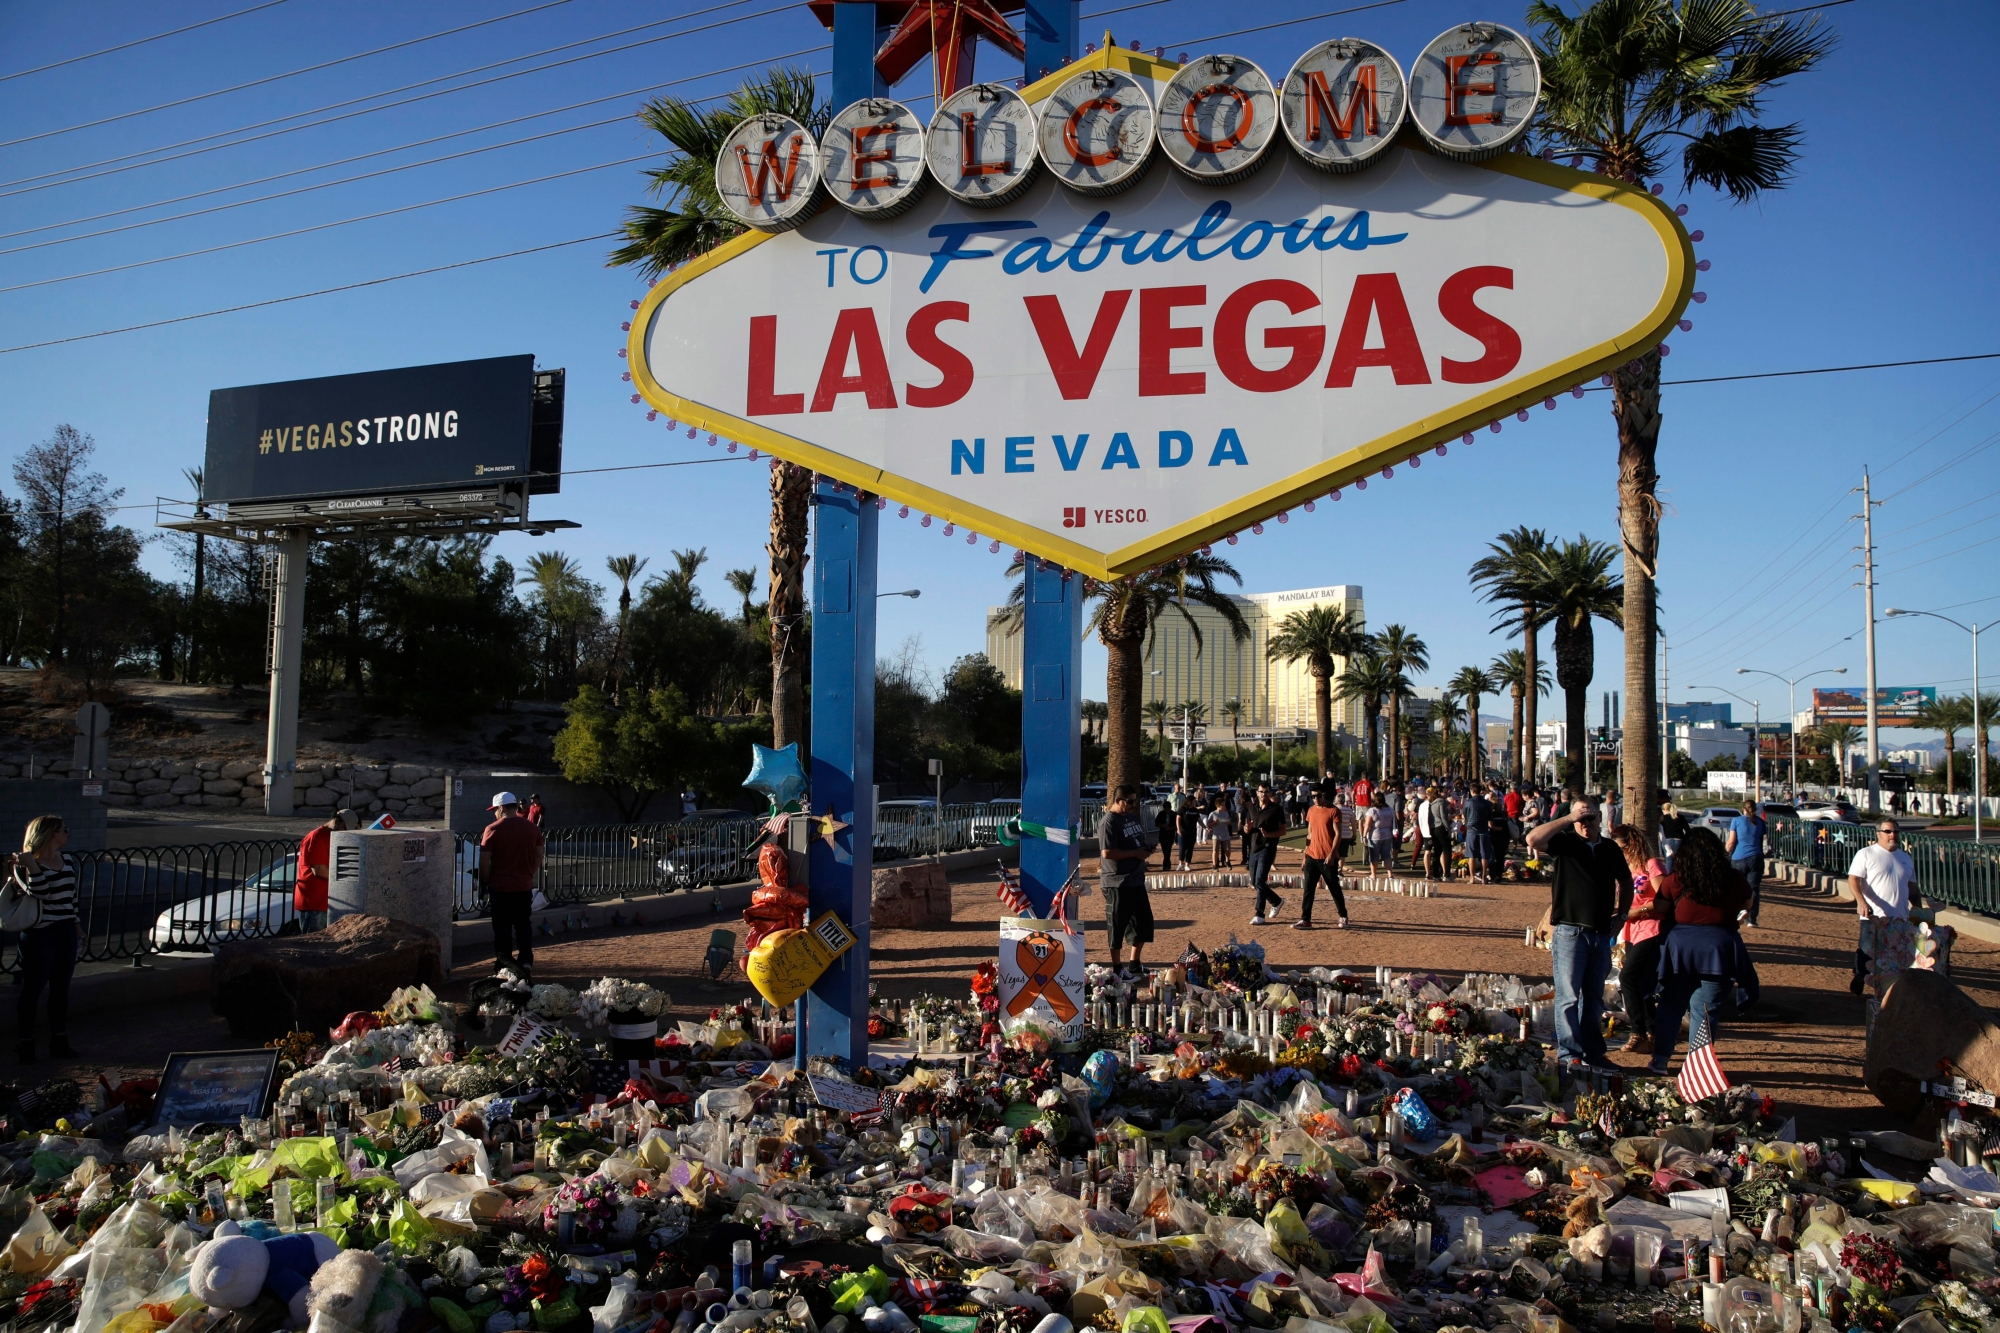 Flowers, candles and other items surround the famous Las Vegas sign at a makeshift memorial for victims of a mass shooting Monday, Oct. 9, 2017, in Las Vegas. Stephen Paddock opened fire on an outdoor country music concert killing dozens and injuring hundreds. (AP Photo/John Locher) Las Vegas Shooting